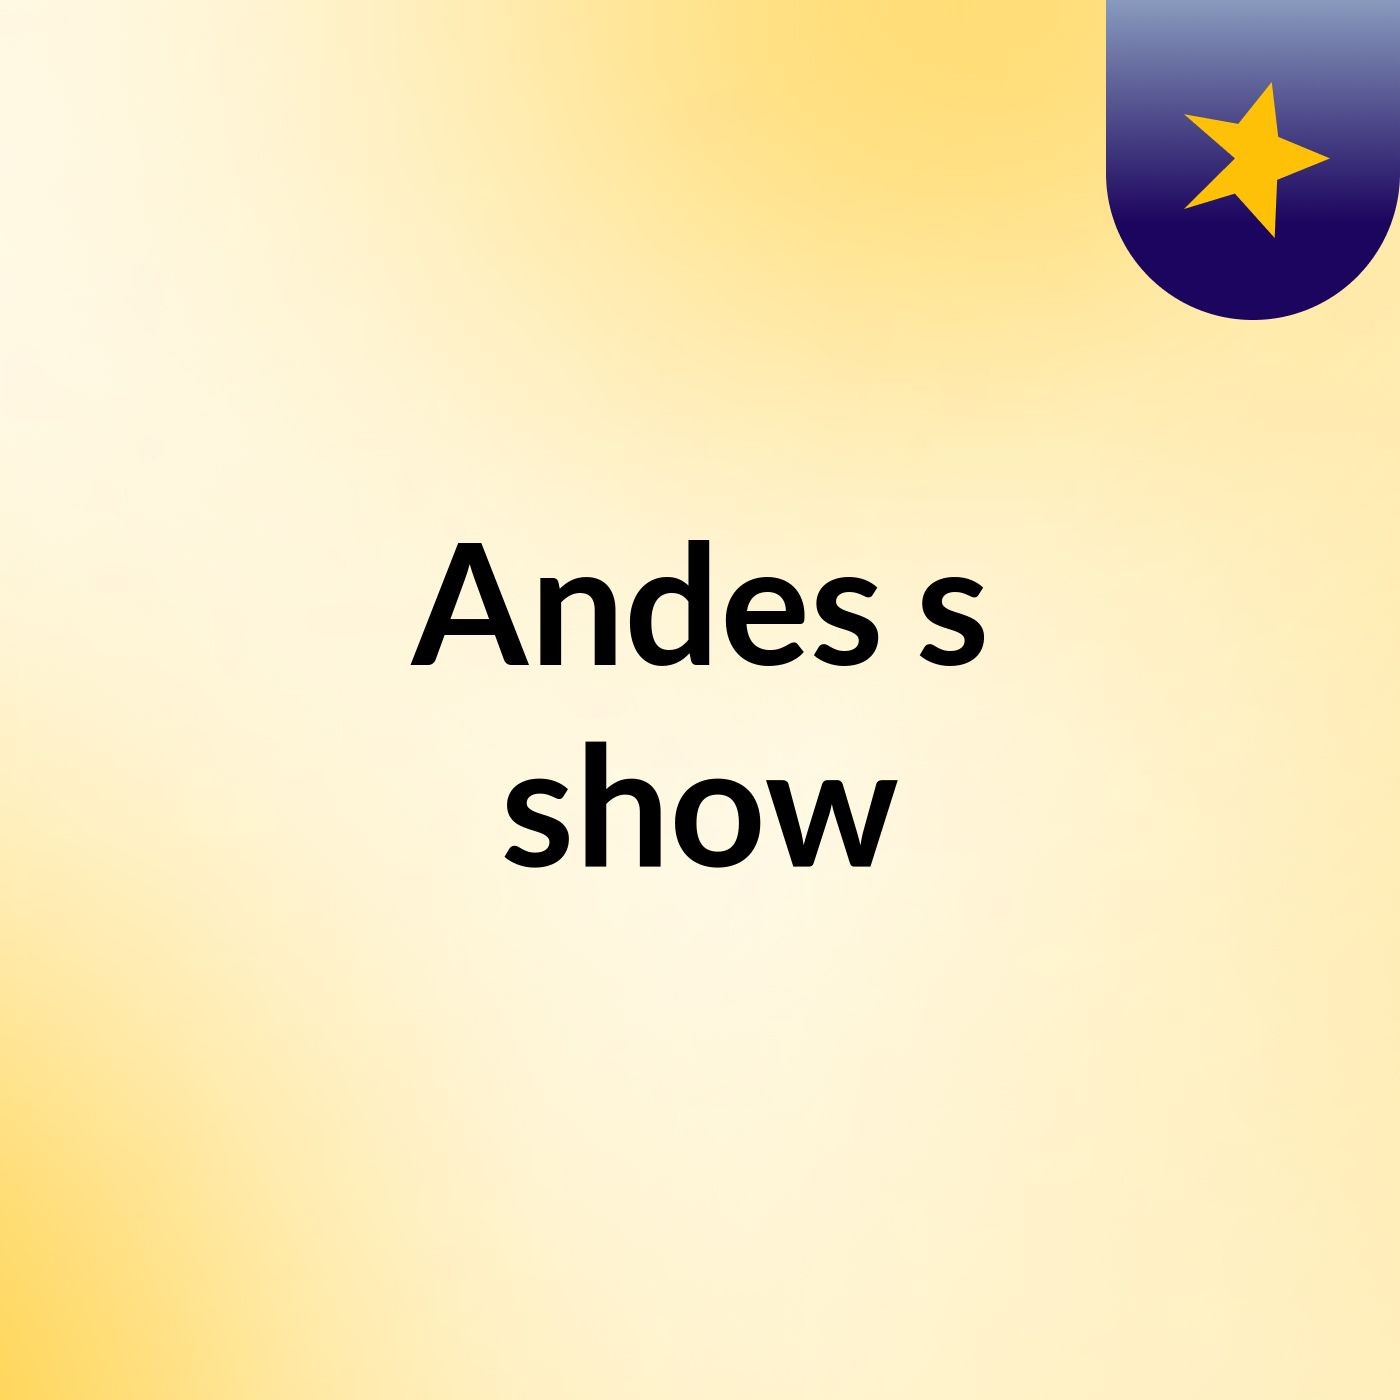 Andes's show